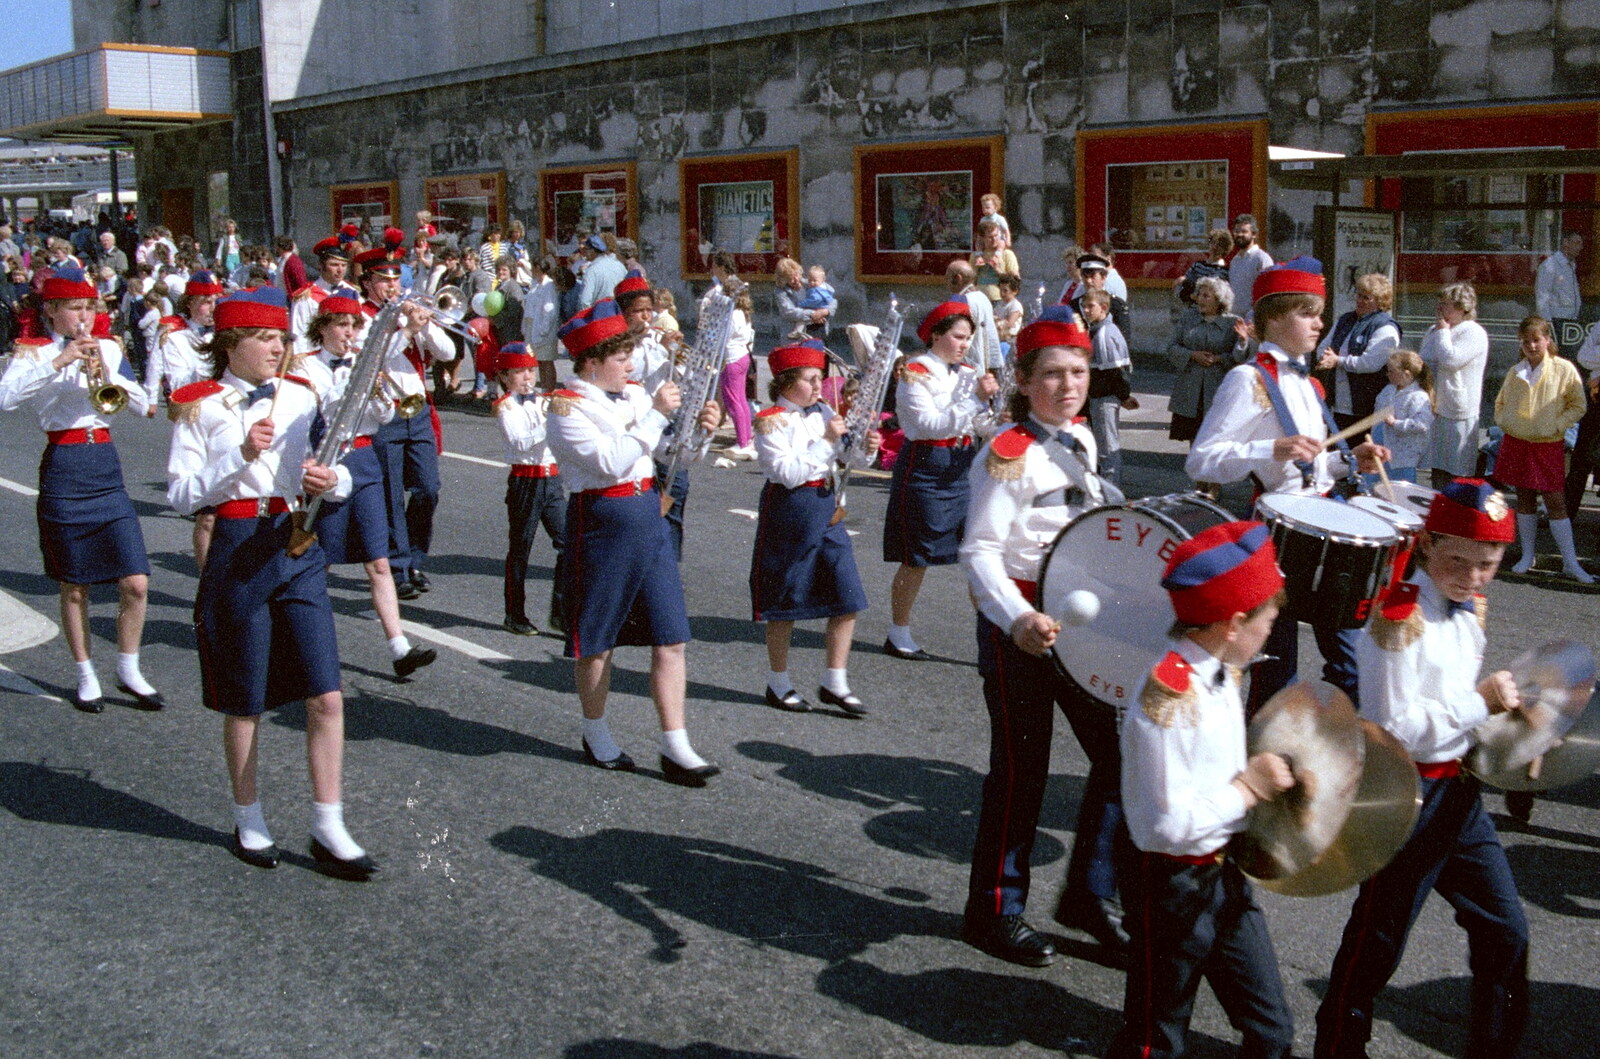 Another marching band passes the cinema from Uni: The Lord Mayor's Procession, Plymouth, Devon - 21st May 1986